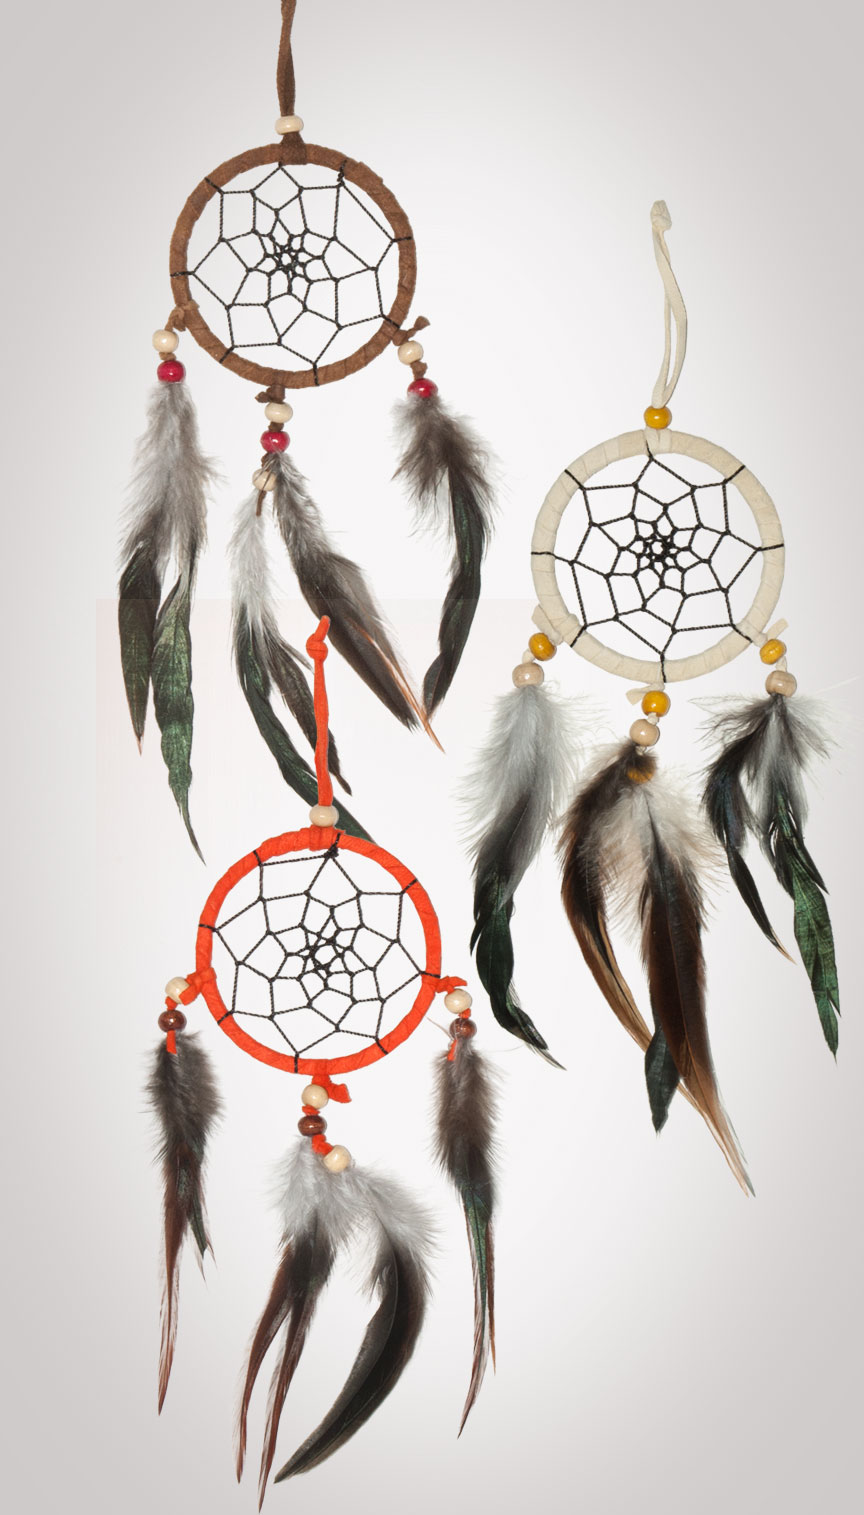 Shows the 3 dreamcatchers in our warm colors dreamcatcher set owg014